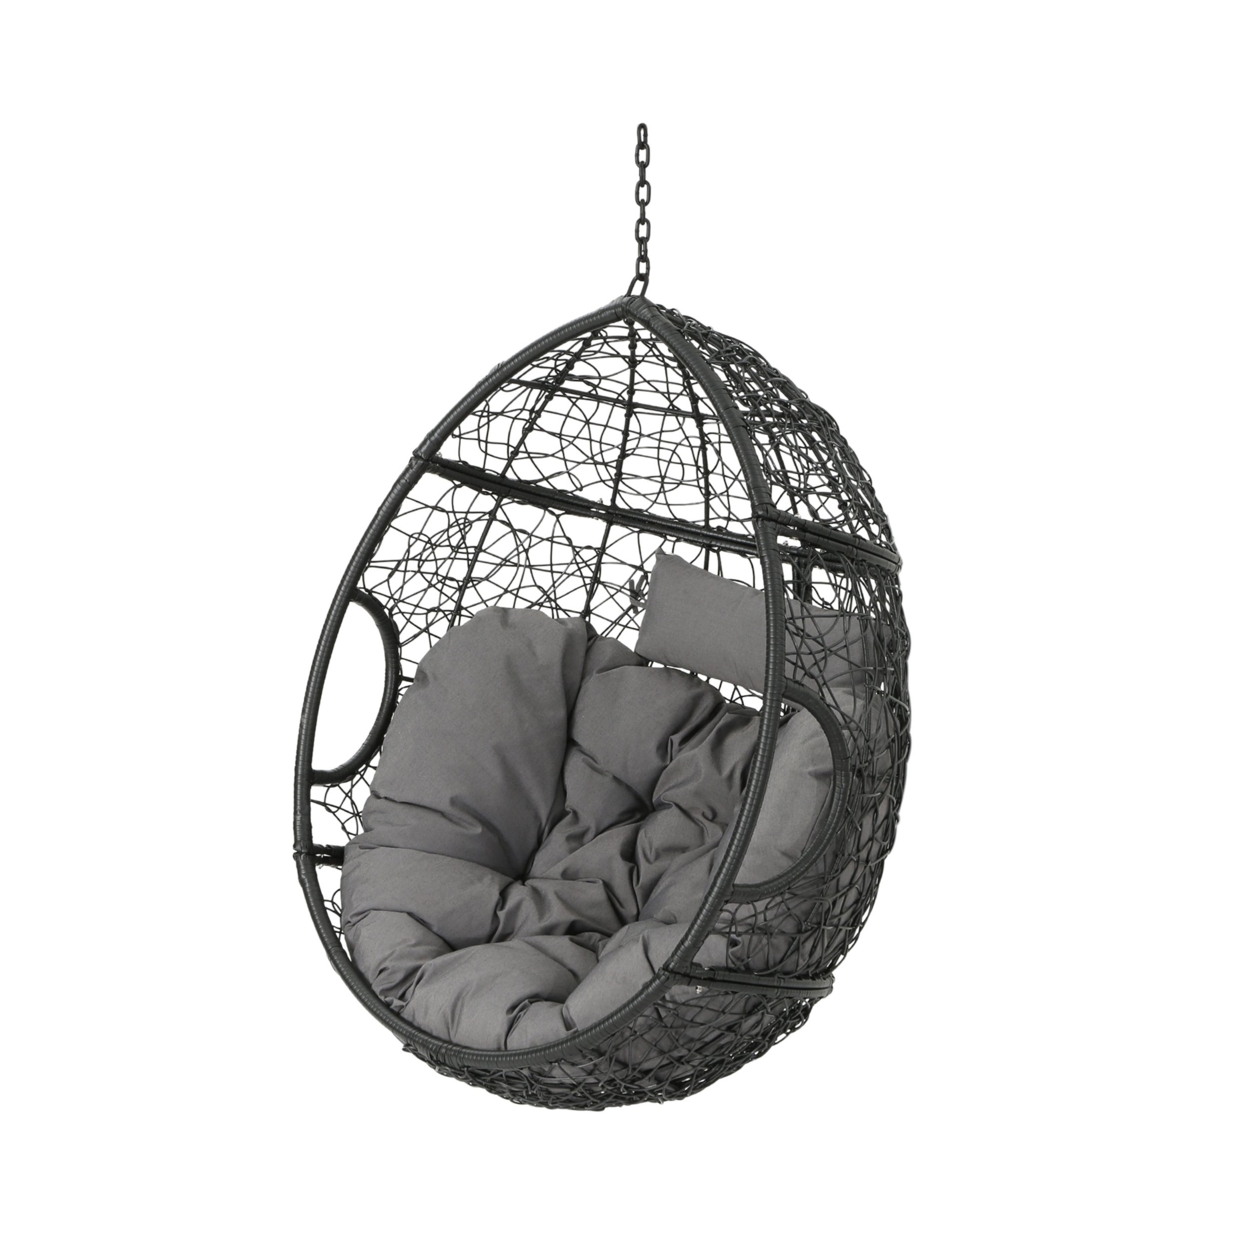 Yosiyah Indoor/Outdoor Hanging Teardrop / Egg Chair (Stand Not Included) - Black/gray